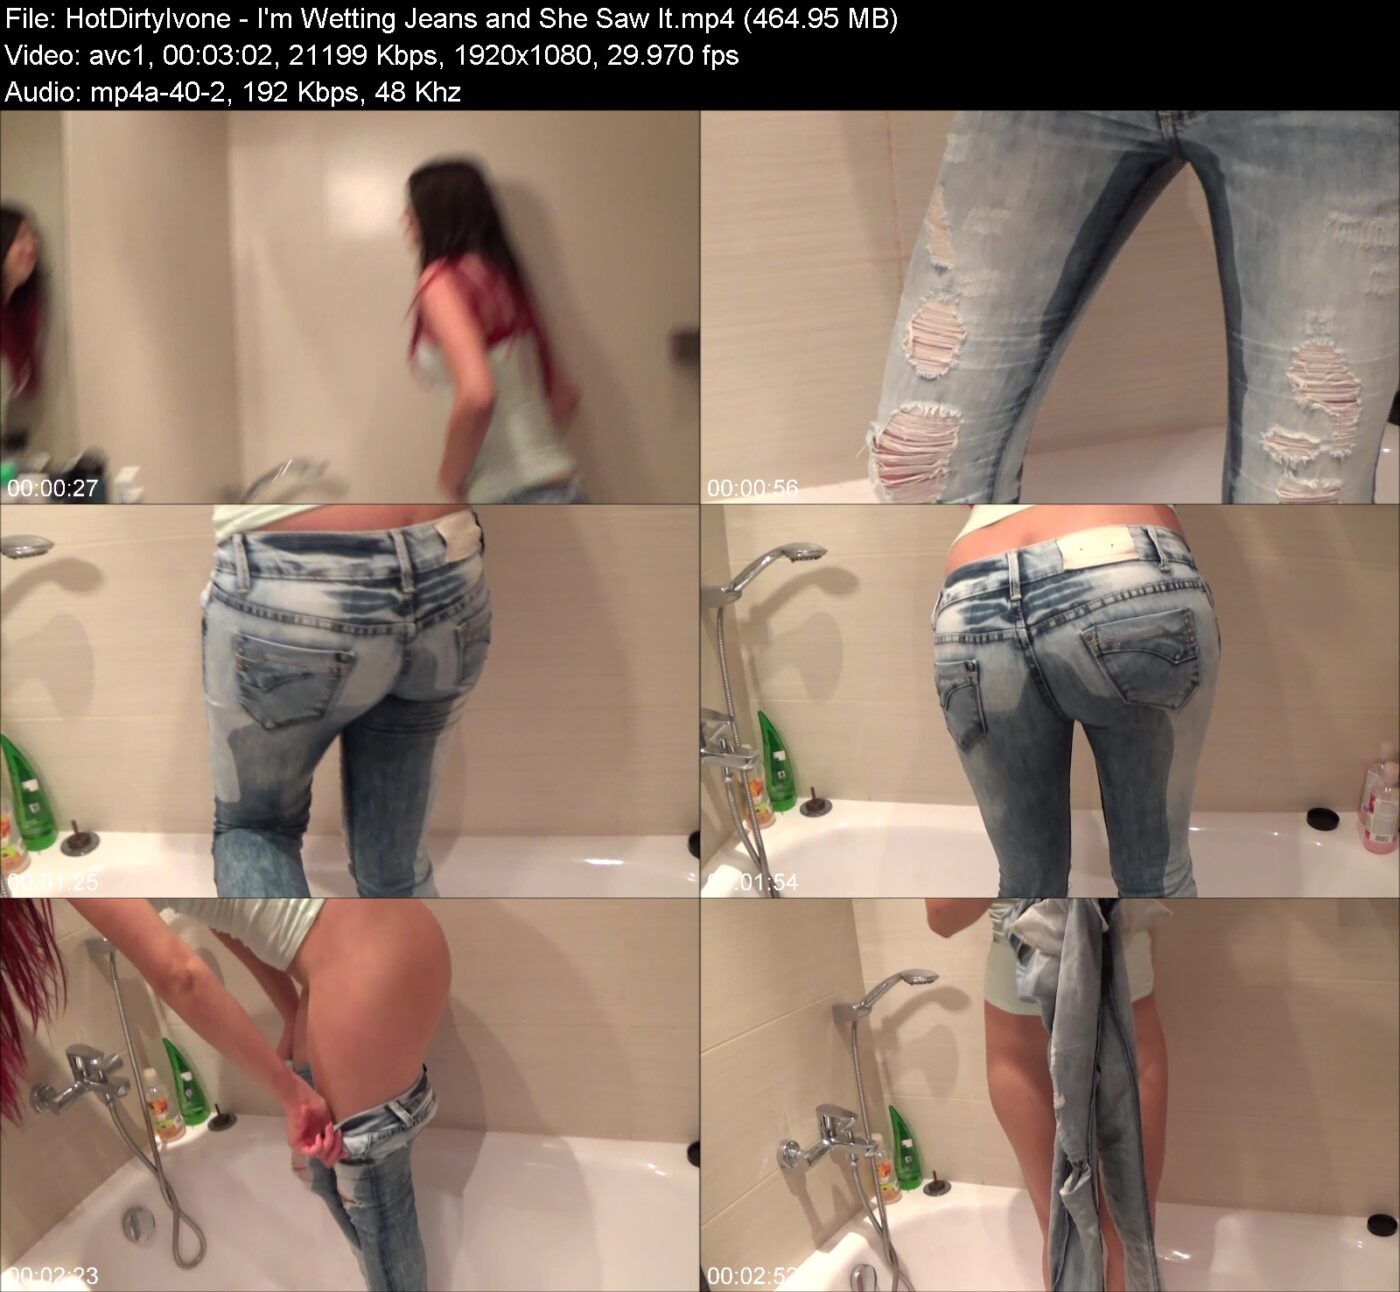 Actress: HotDirtyIvone. Title and Studio: I’m Wetting Jeans and She Saw It